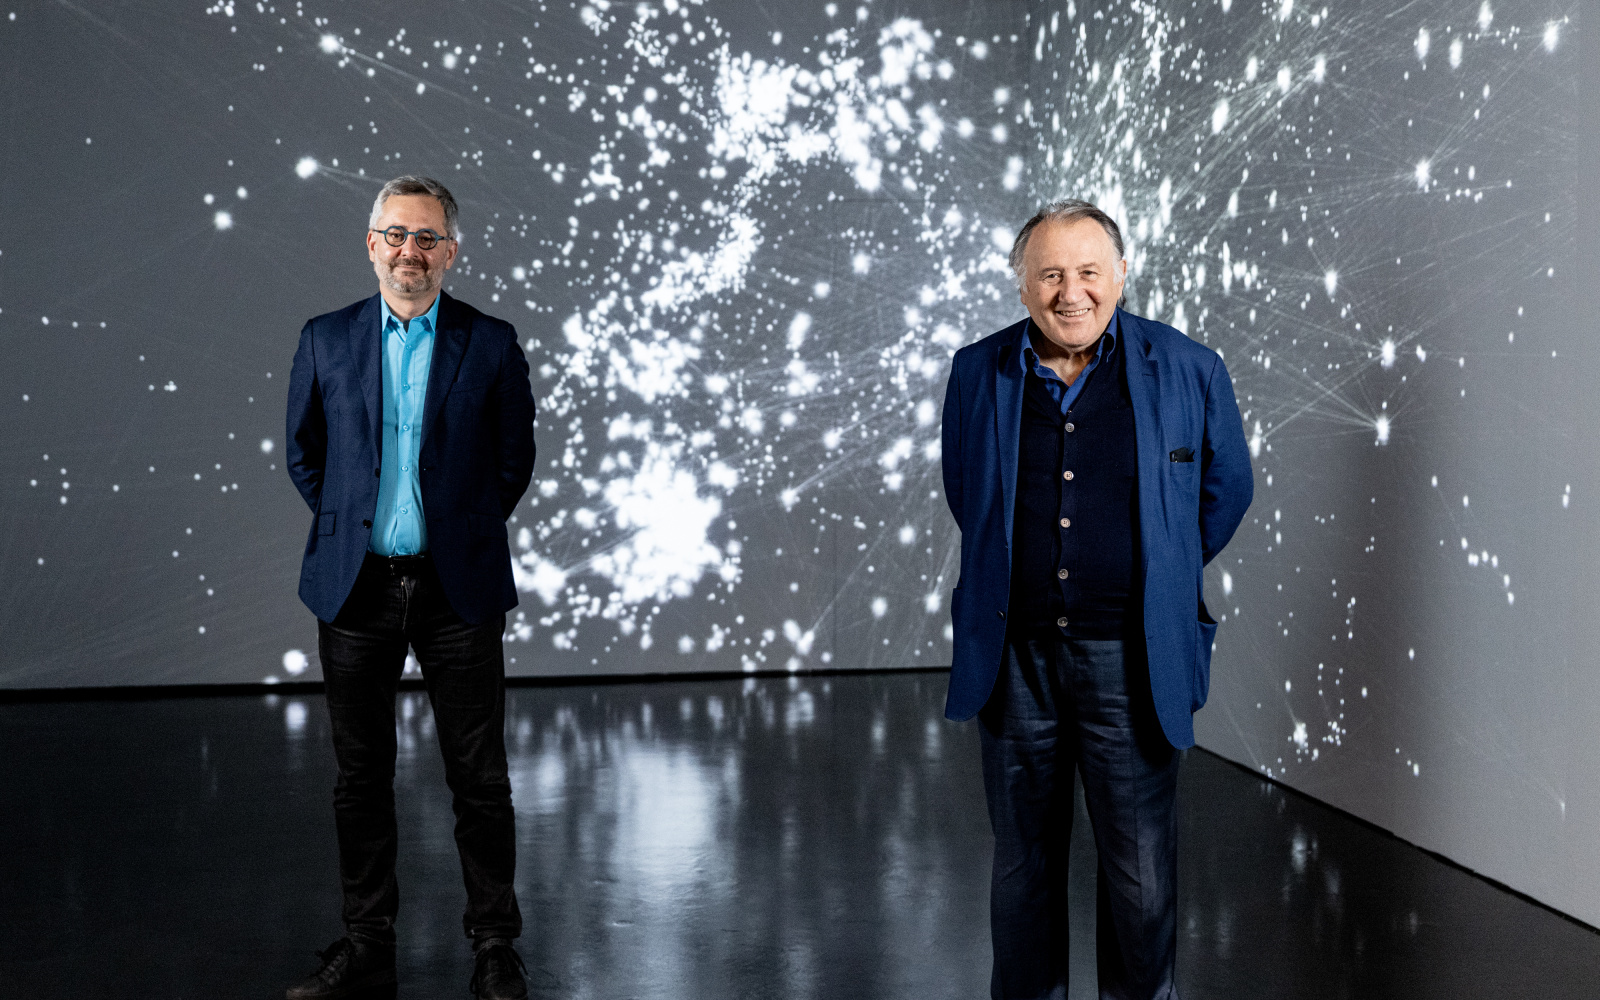 Two men stand in the exhibition room in front of a projection that shows the cosmos as a network. The man on the left is the scientist Albert-Lázsló Barabási. The right man is Peter Weibel. Both are smiling, their arms are behind their backs.